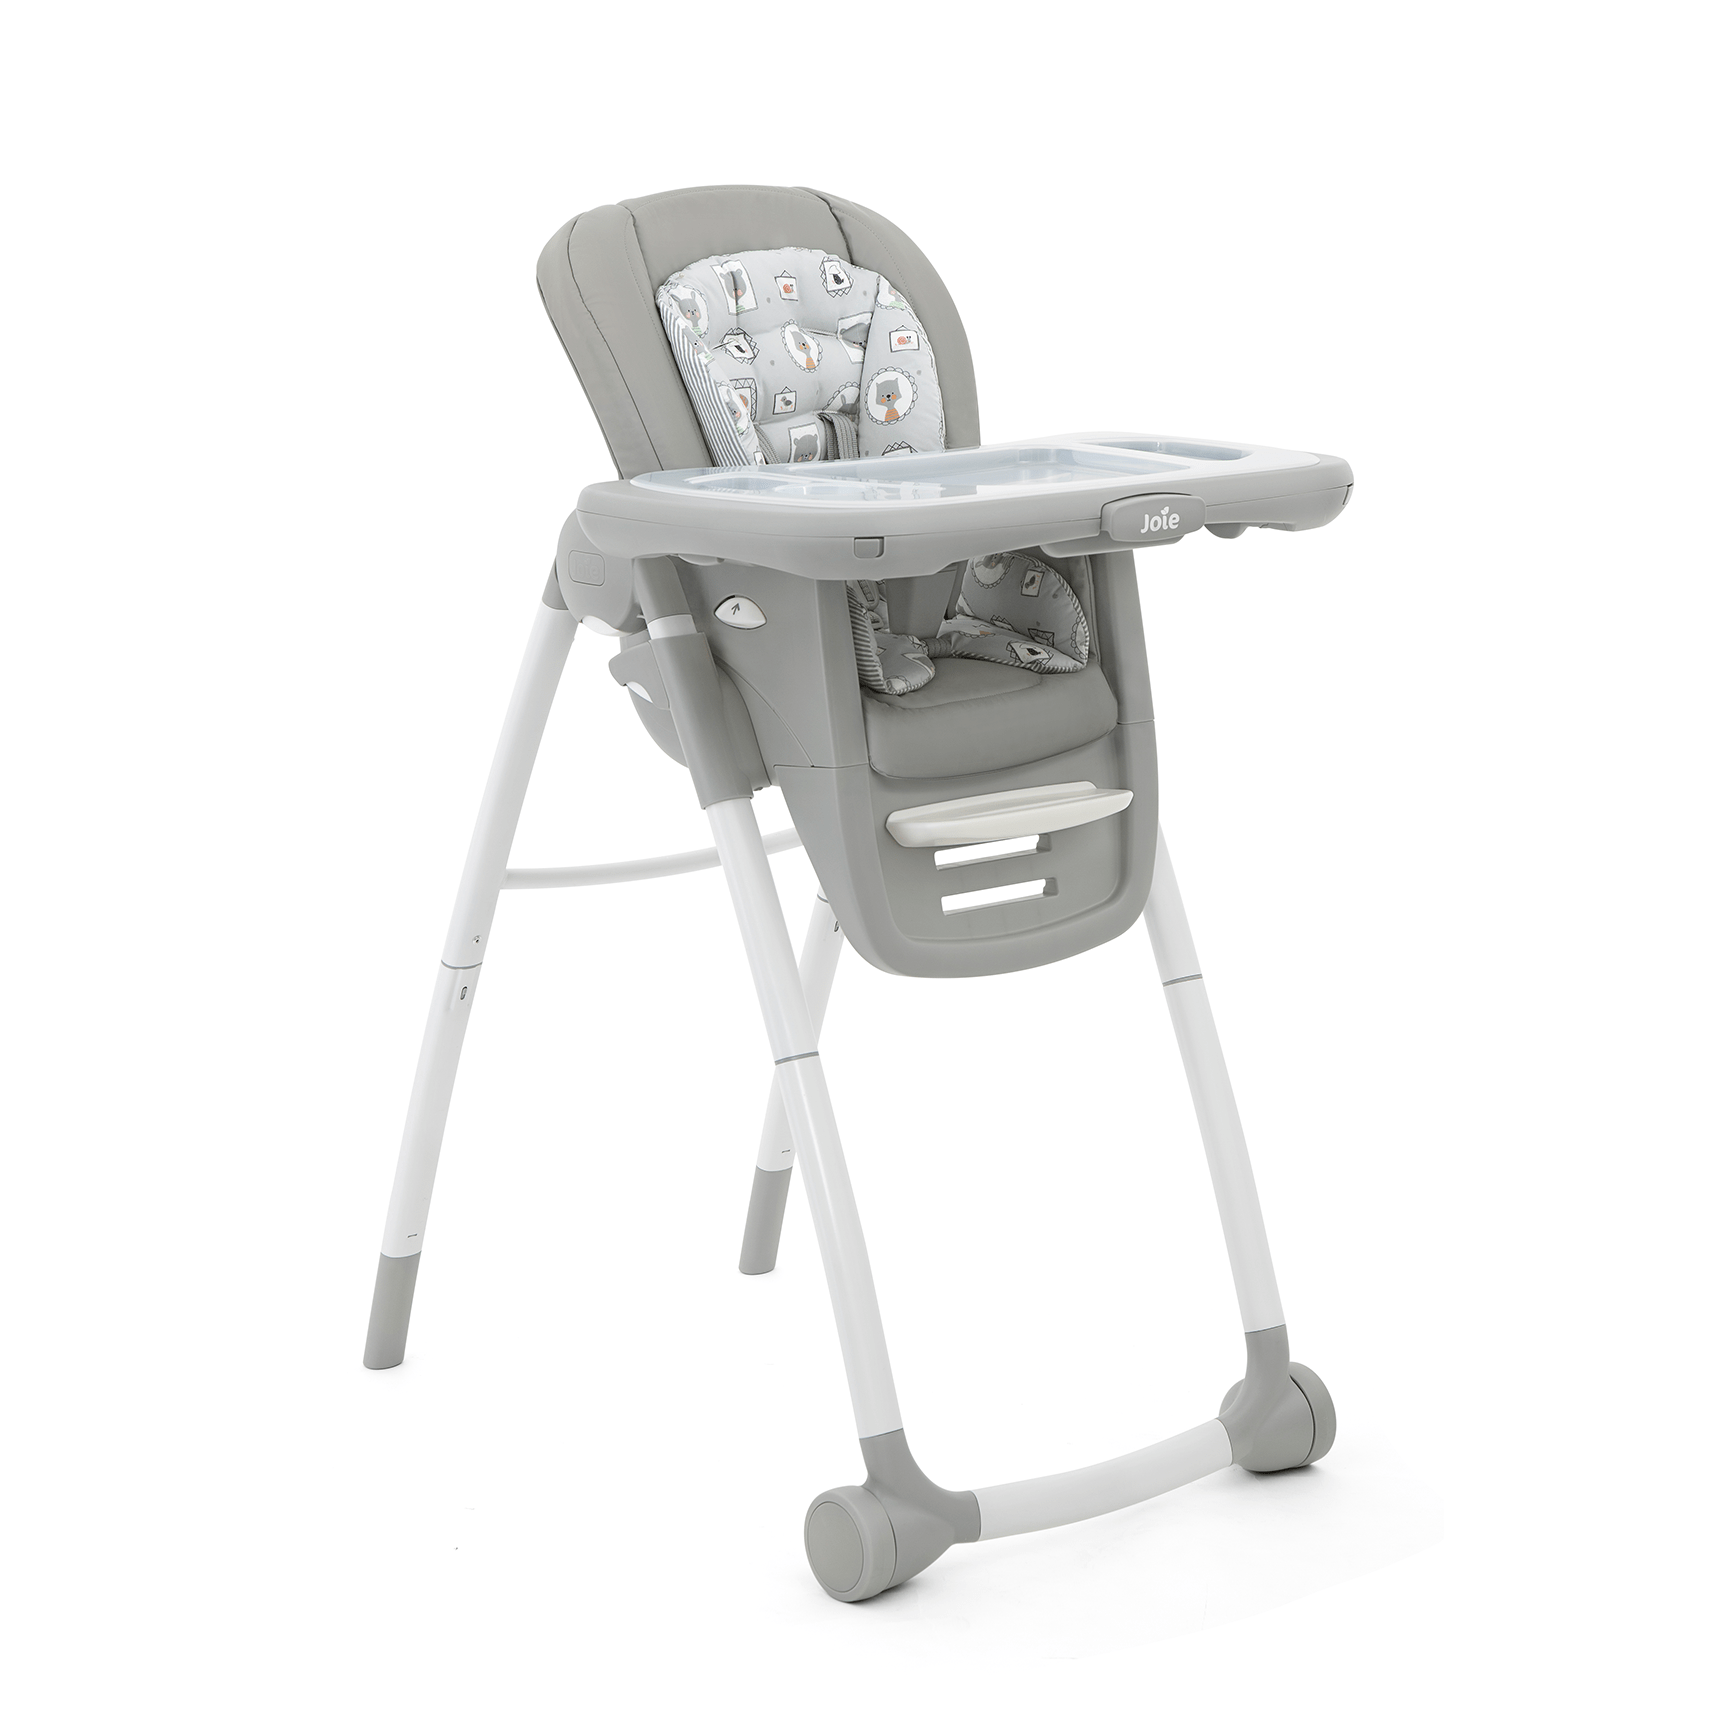 Joie Mimzy Spin 3in1 Highchair in Geometric Mountains